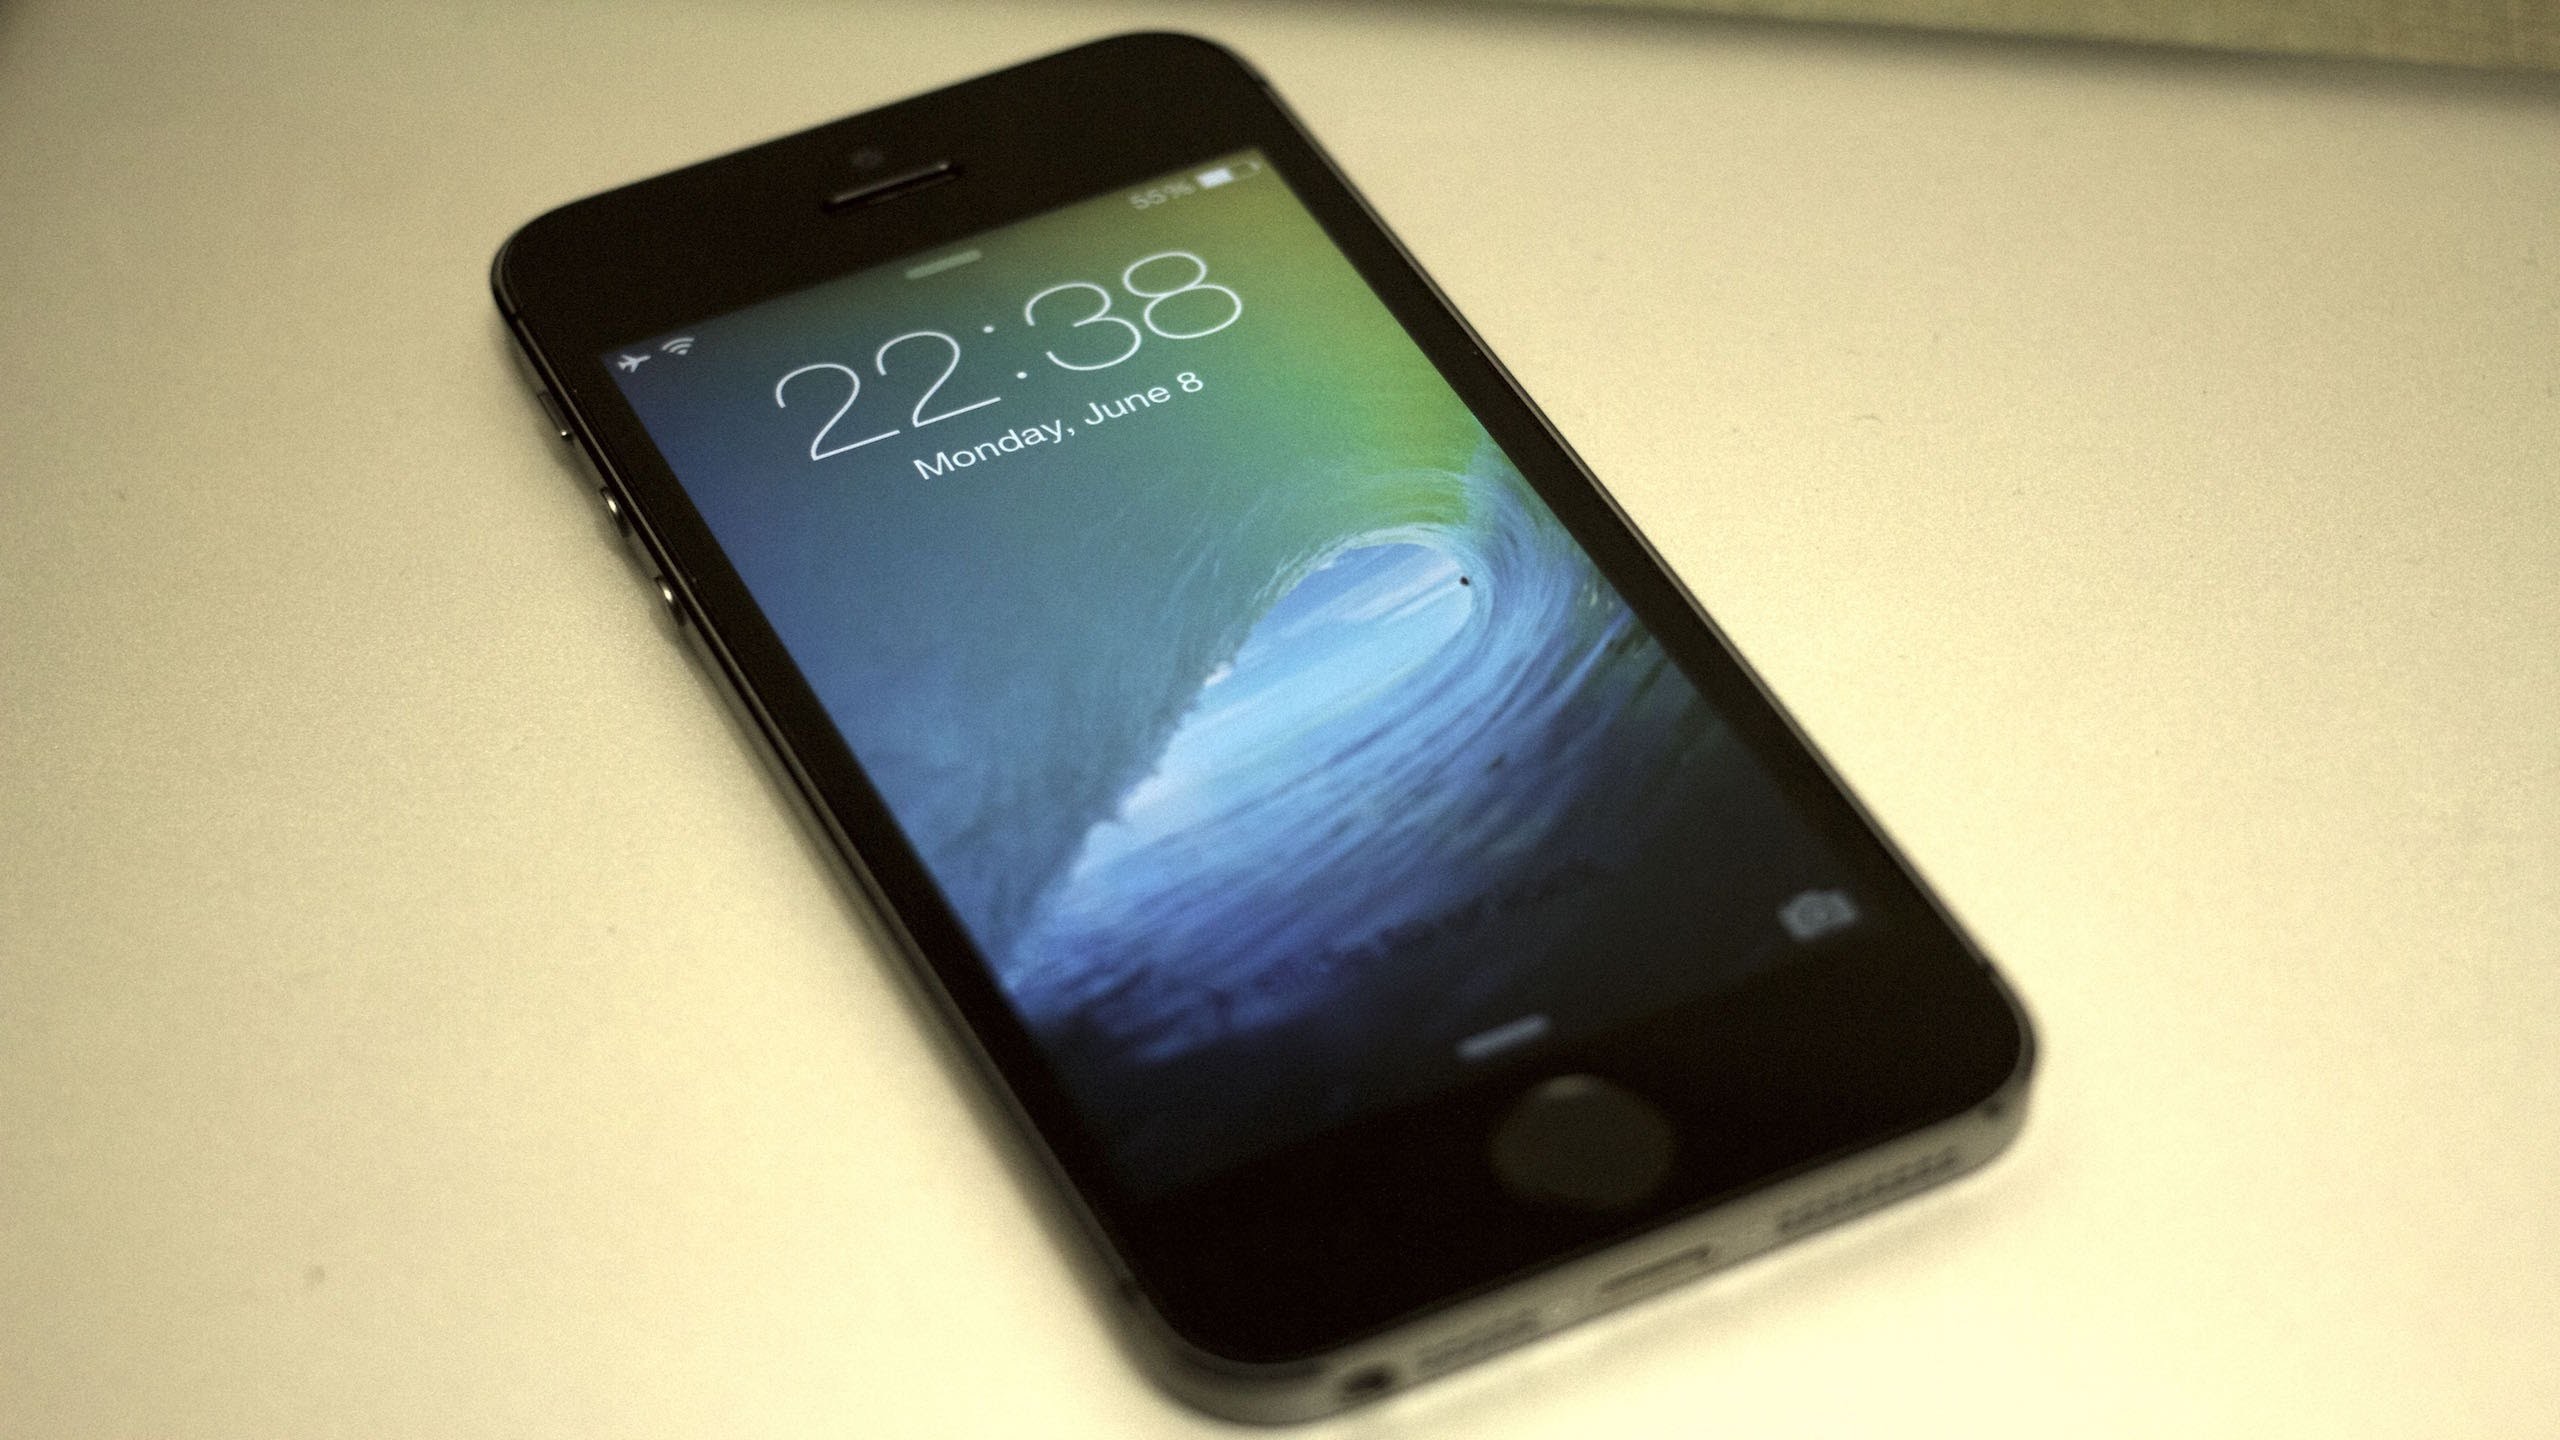 2560x1440 NEW iOS 9 Wallpaper for iPhone 6 Plus,6,5s,5,4s,4 - DOWNLOAD NOW FREE